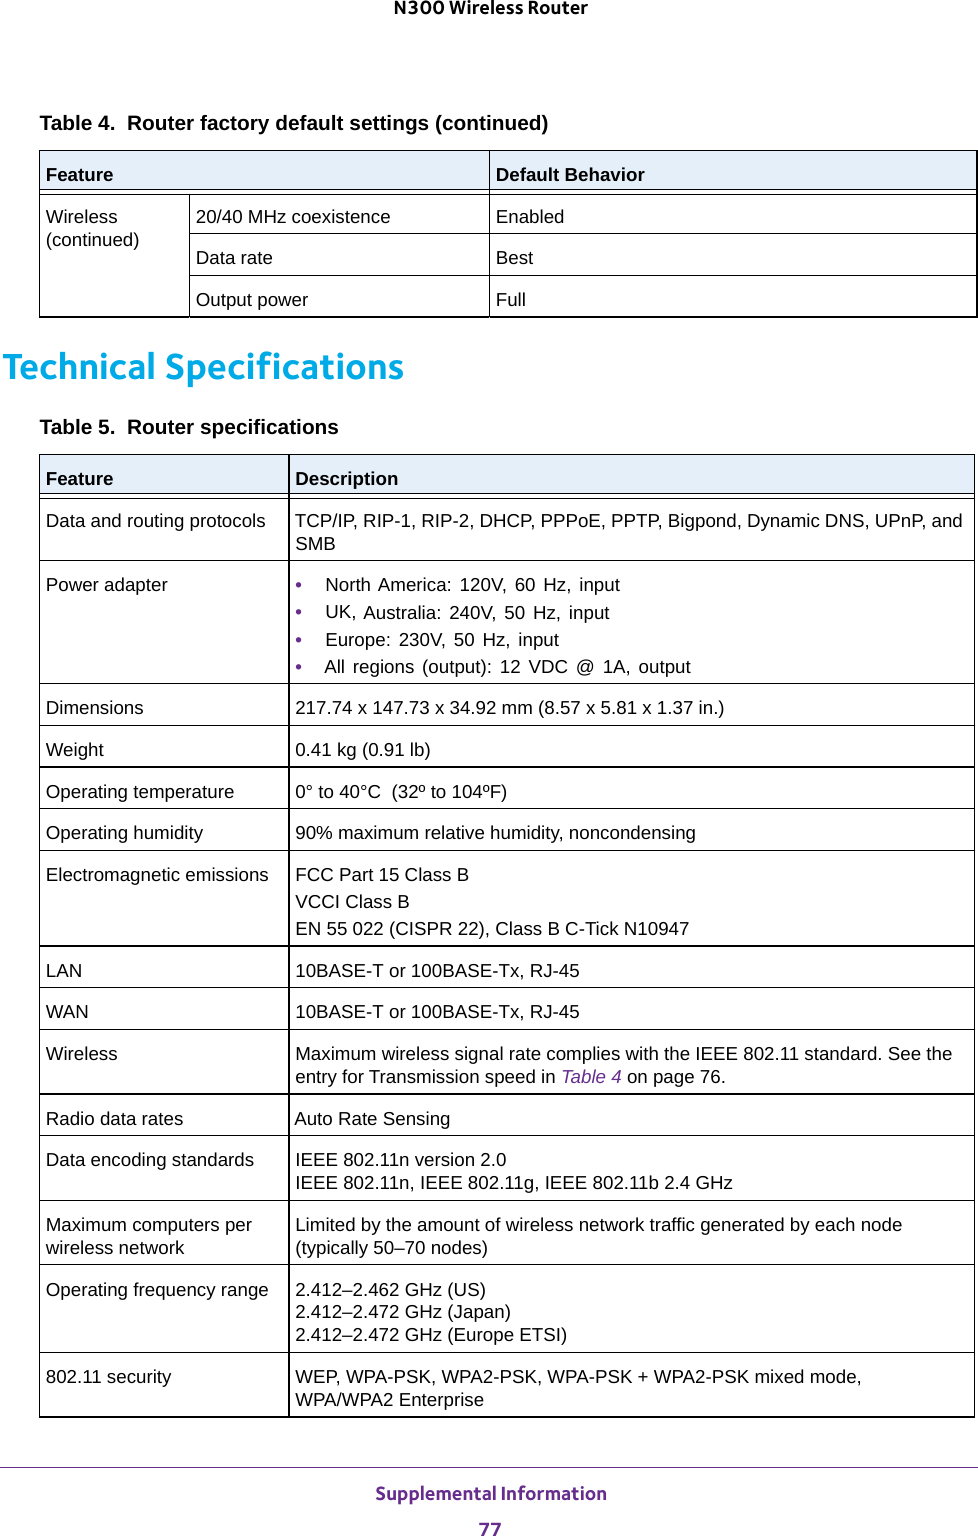  Supplemental Information77 N300 Wireless RouterTechnical SpecificationsTable 5.  Router specifications  Feature DescriptionData and routing protocols TCP/IP, RIP-1, RIP-2, DHCP, PPPoE, PPTP, Bigpond, Dynamic DNS, UPnP, and SMBPower adapter •  North America: 120V, 60 Hz, input•  UK, Australia: 240V, 50 Hz, input•  Europe: 230V, 50 Hz, input•  All regions (output): 12 VDC @ 1A, outputDimensions  217.74 x 147.73 x 34.92 mm (8.57 x 5.81 x 1.37 in.)Weight  0.41 kg (0.91 lb)Operating temperature 0° to 40°C   (32º to 104ºF)Operating humidity 90% maximum relative humidity, noncondensingElectromagnetic emissions FCC Part 15 Class BVCCI Class BEN 55 022 (CISPR 22), Class B C-Tick N10947LAN 10BASE-T or 100BASE-Tx, RJ-45WAN 10BASE-T or 100BASE-Tx, RJ-45Wireless Maximum wireless signal rate complies with the IEEE 802.11 standard. See the entry for Transmission speed in Table  4 on page  76.Radio data rates Auto Rate SensingData encoding standards IEEE 802.11n version 2.0 IEEE 802.11n, IEEE 802.11g, IEEE 802.11b 2.4 GHzMaximum computers per wireless networkLimited by the amount of wireless network traffic generated by each node (typically 50–70 nodes)Operating frequency range  2.412–2.462 GHz (US) 2.412–2.472 GHz (Japan) 2.412–2.472 GHz (Europe ETSI)802.11 security WEP, WPA-PSK, WPA2-PSK, WPA-PSK + WPA2-PSK mixed mode,  WPA/WPA2 EnterpriseWireless (continued)20/40 MHz coexistence EnabledData rate BestOutput power FullTable 4.  Router factory default settings (continued)Feature Default Behavior